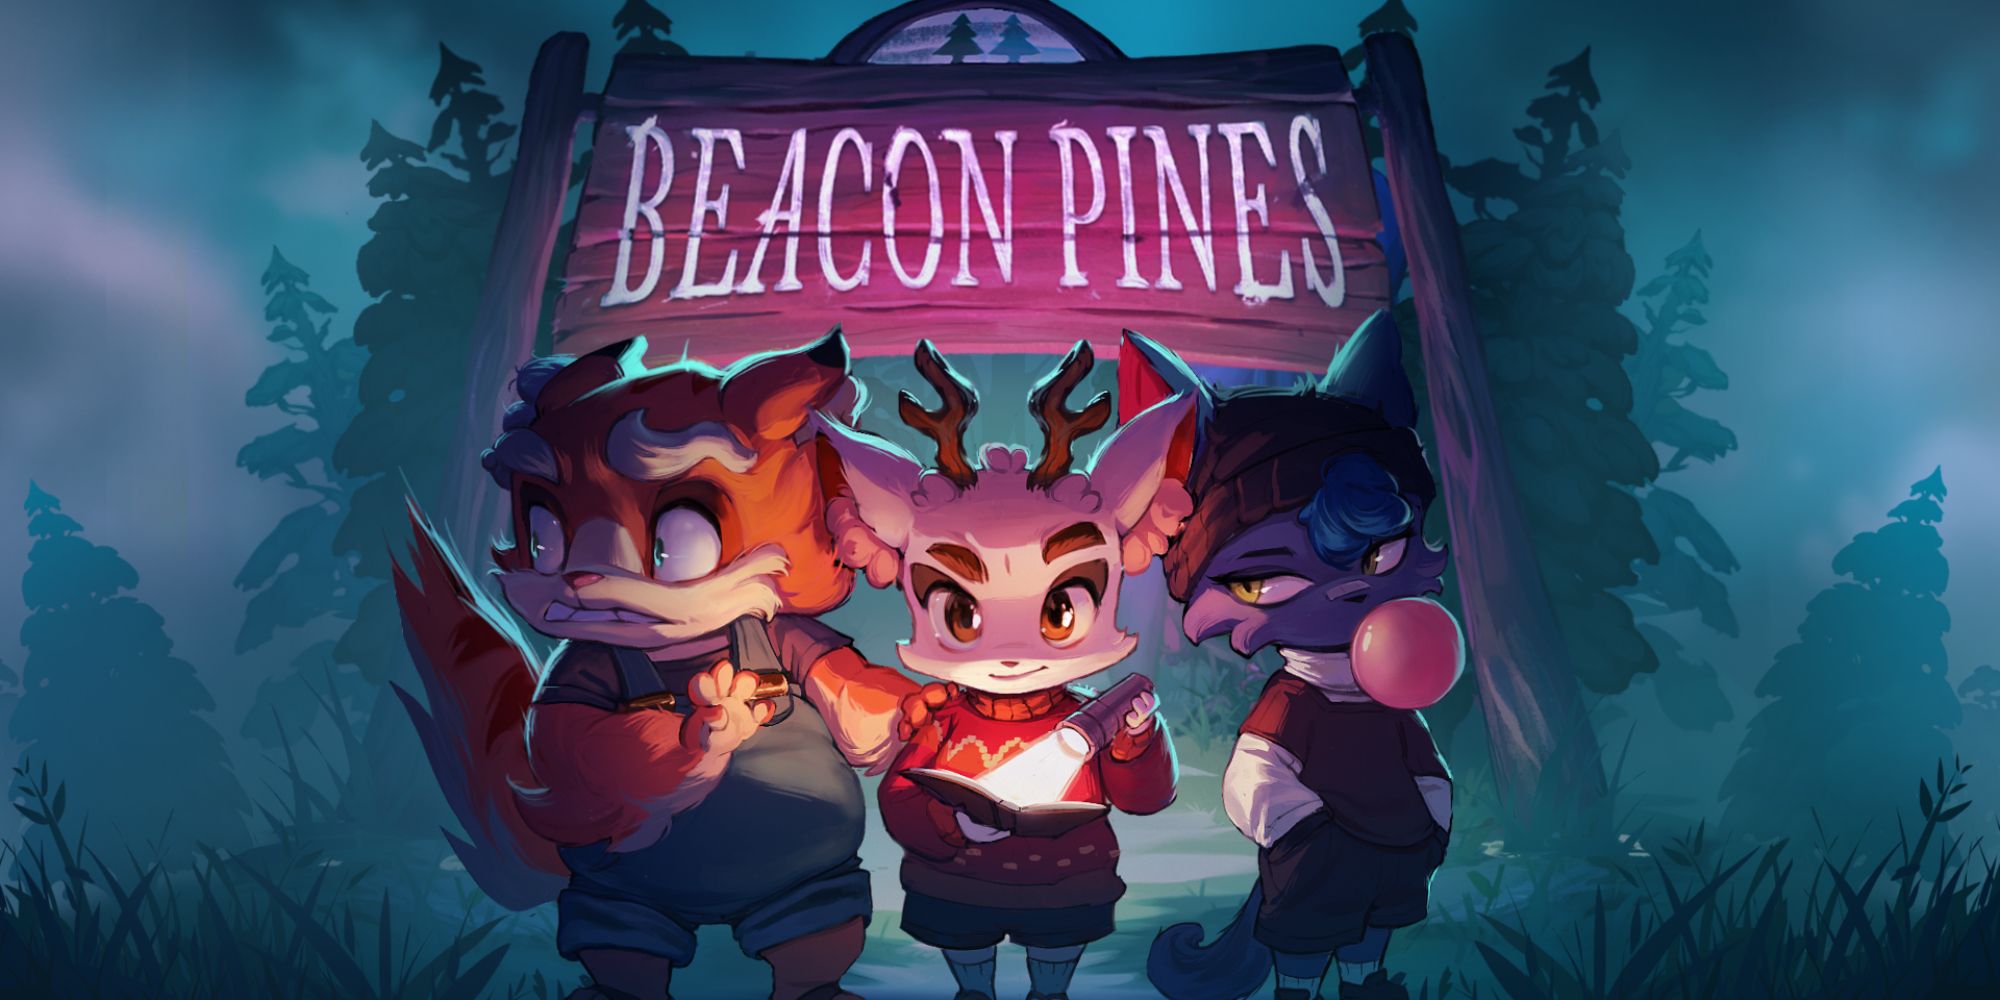 Beacon Pines key art featuring main characters Luka, Rolo, and Beck.